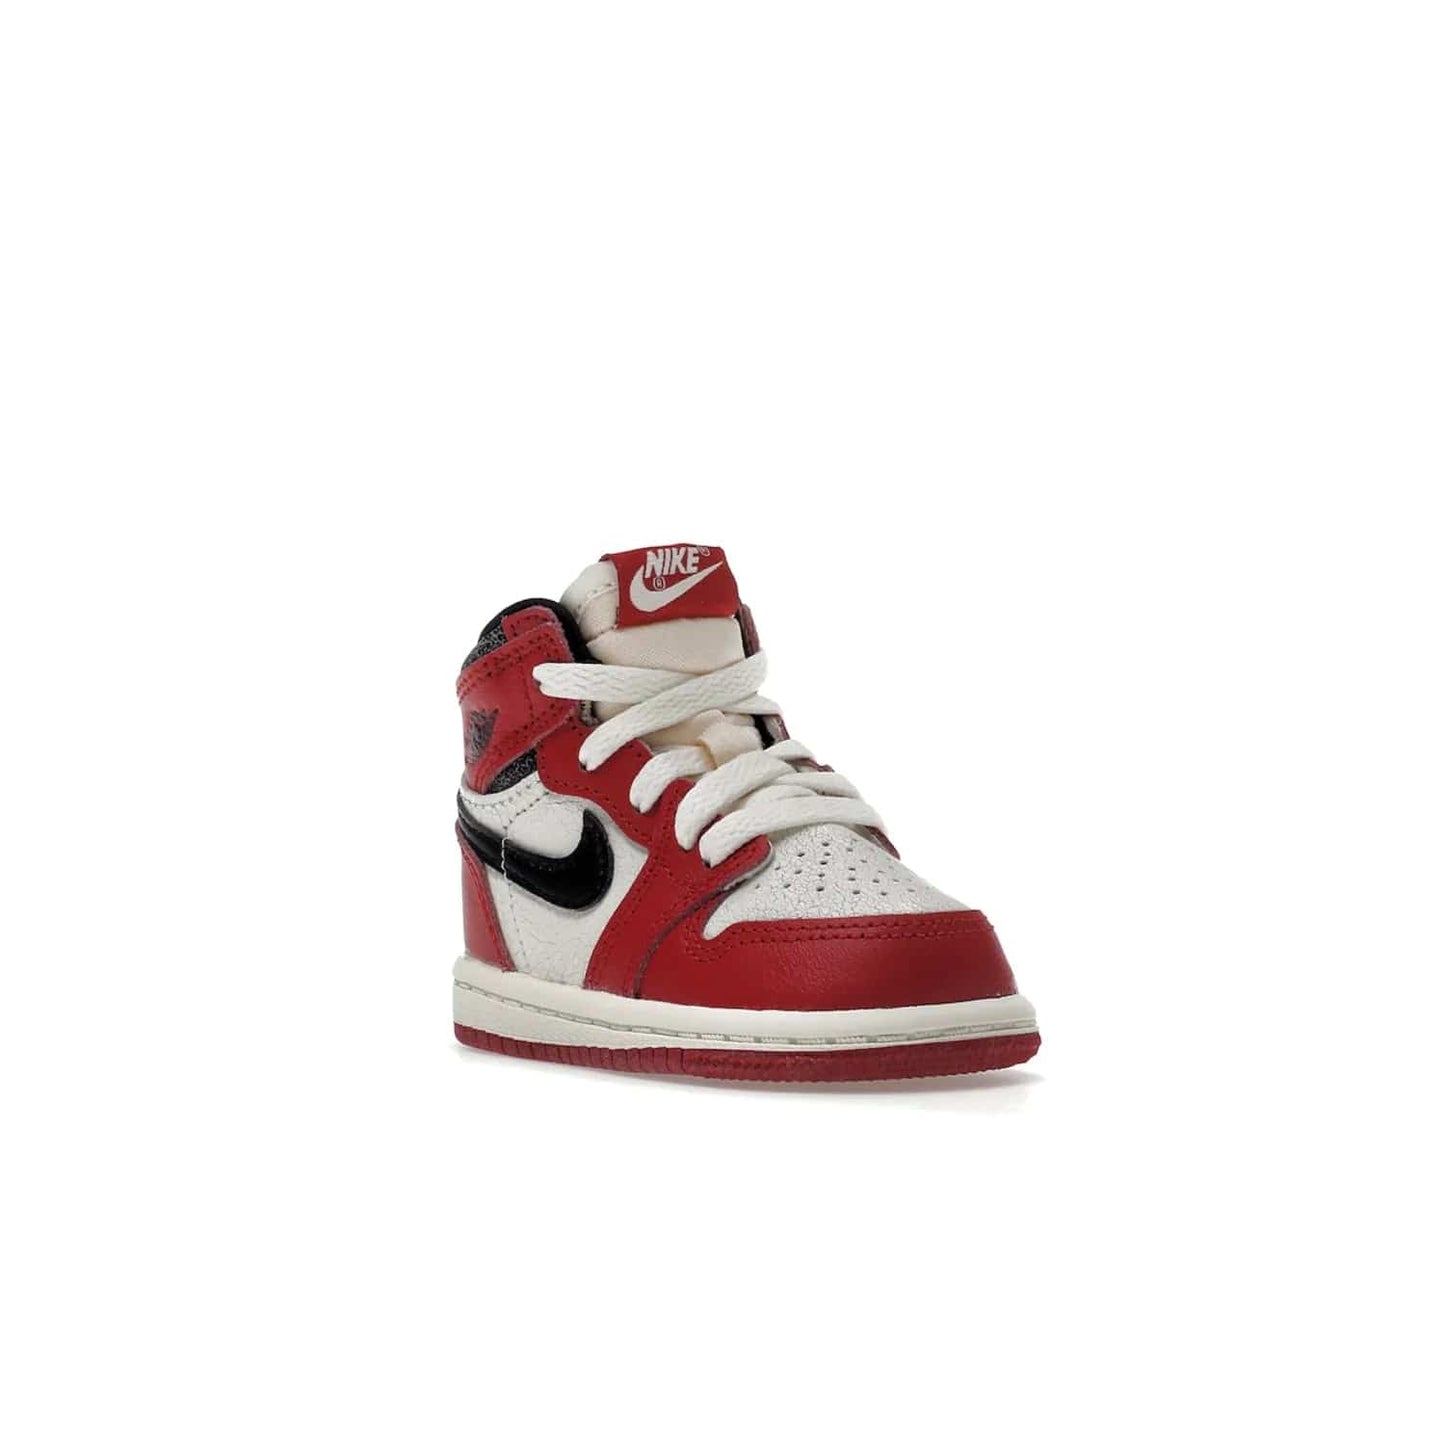 Jordan 1 Retro High OG Chicago Lost and Found (TD) - Image 6 - Only at www.BallersClubKickz.com - Introducing the Air Jordan 1 Retro High OG Lost and Found TD – a vibrant combination of 4 colors: muslin, varsity, sail and black. Featuring a crackled leather upper and AIR units for comfort and a signature Wings logo, these retro shoes add comfort and style for your little ones at $70. Get your pair before 19th December 2022!